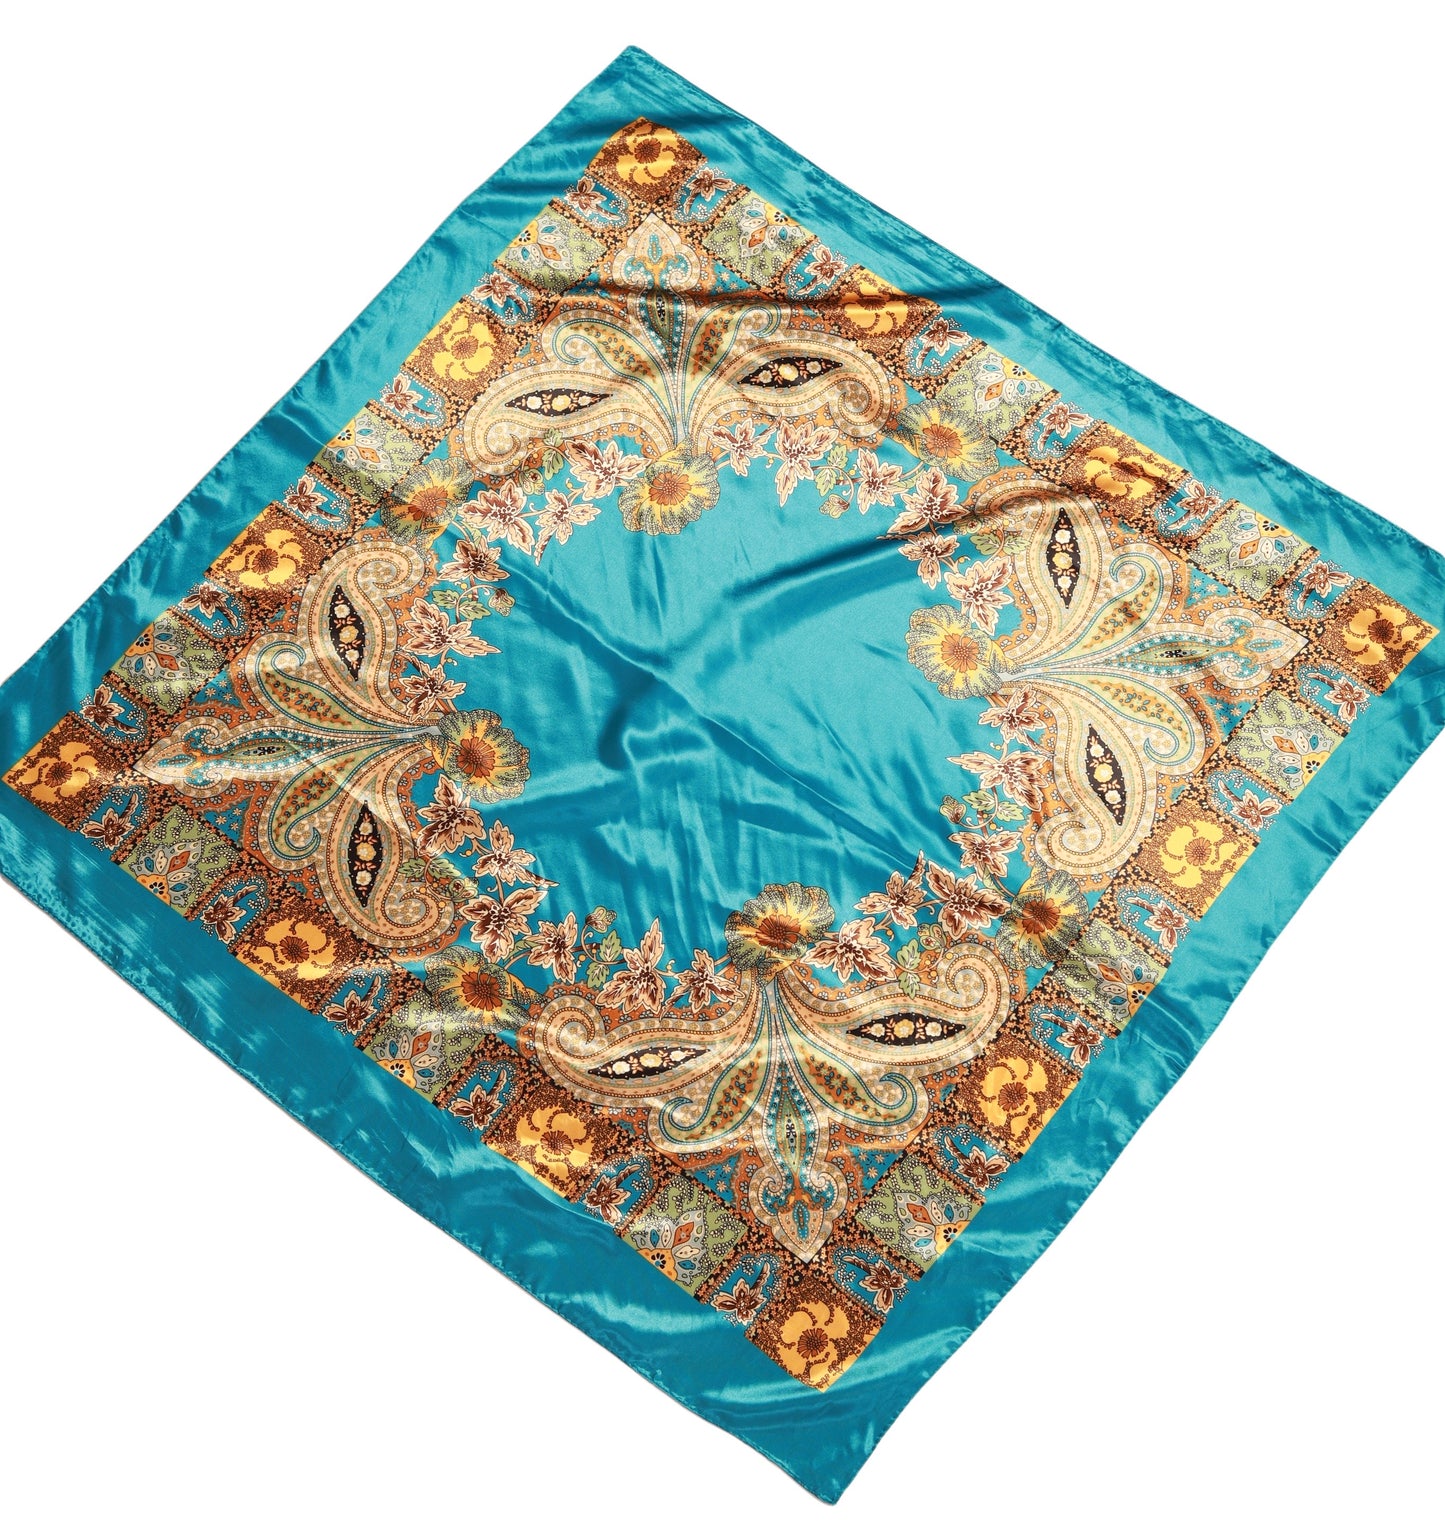 Turquoise Based Paisley Silky Scarf